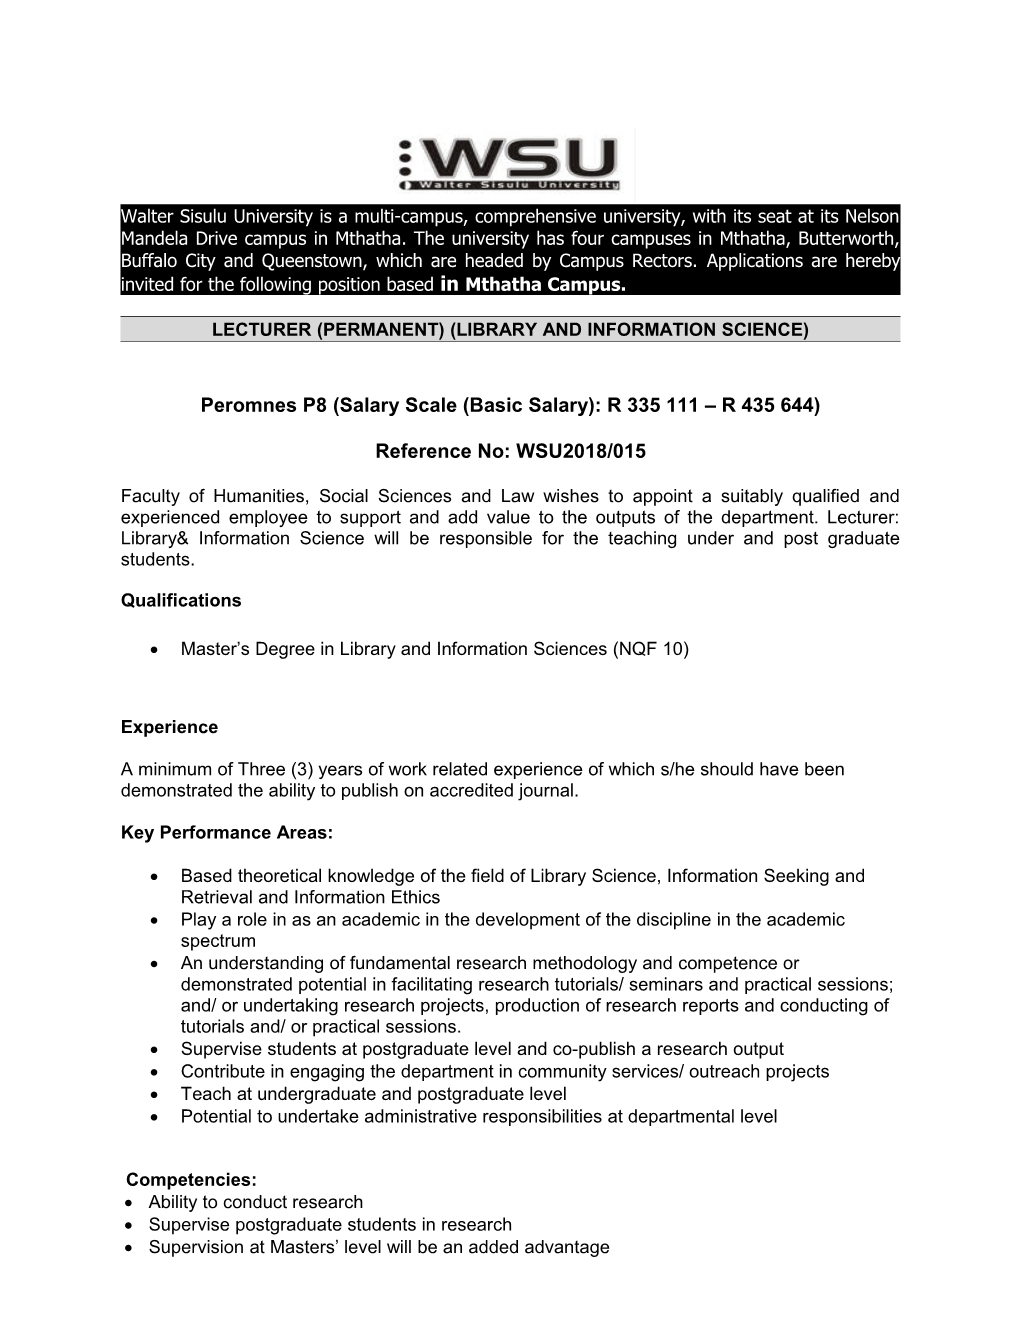 Lecturer (Permanent) (Library and Information Science)